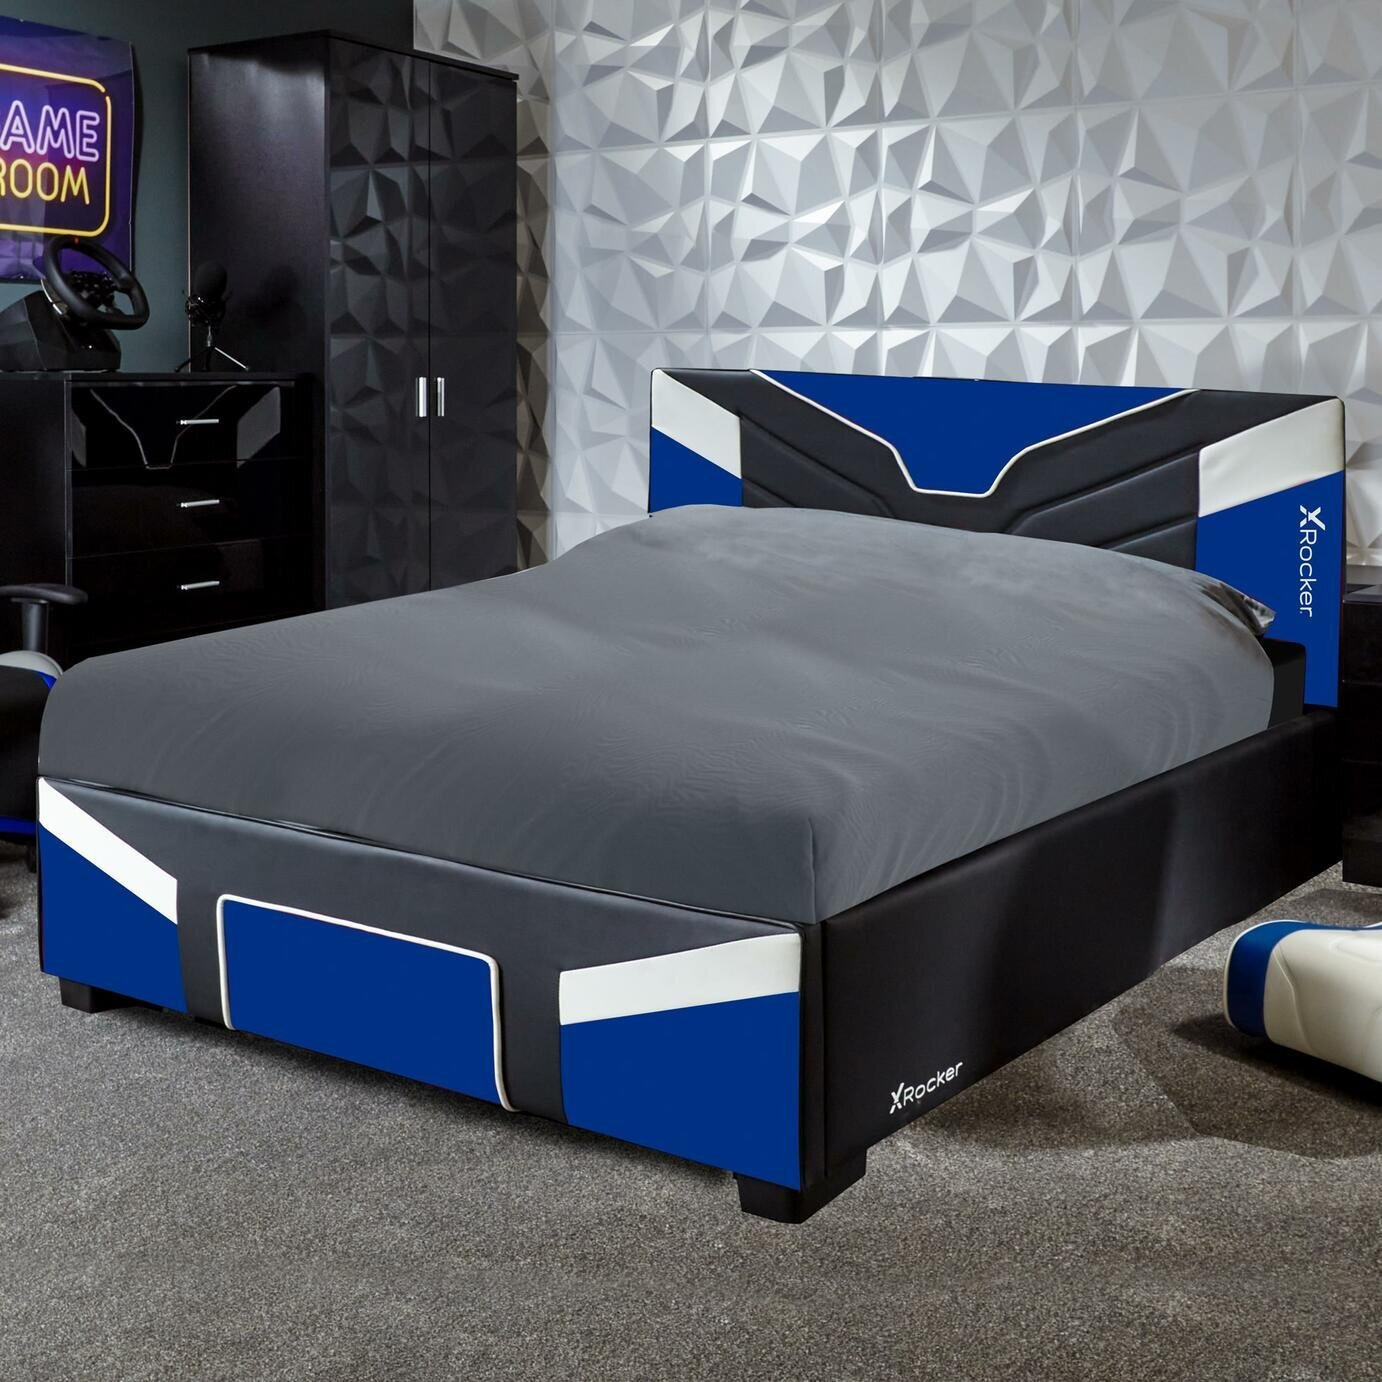 X Rocker Cerberus Gaming Bed in a Box Double - Blue - image 1